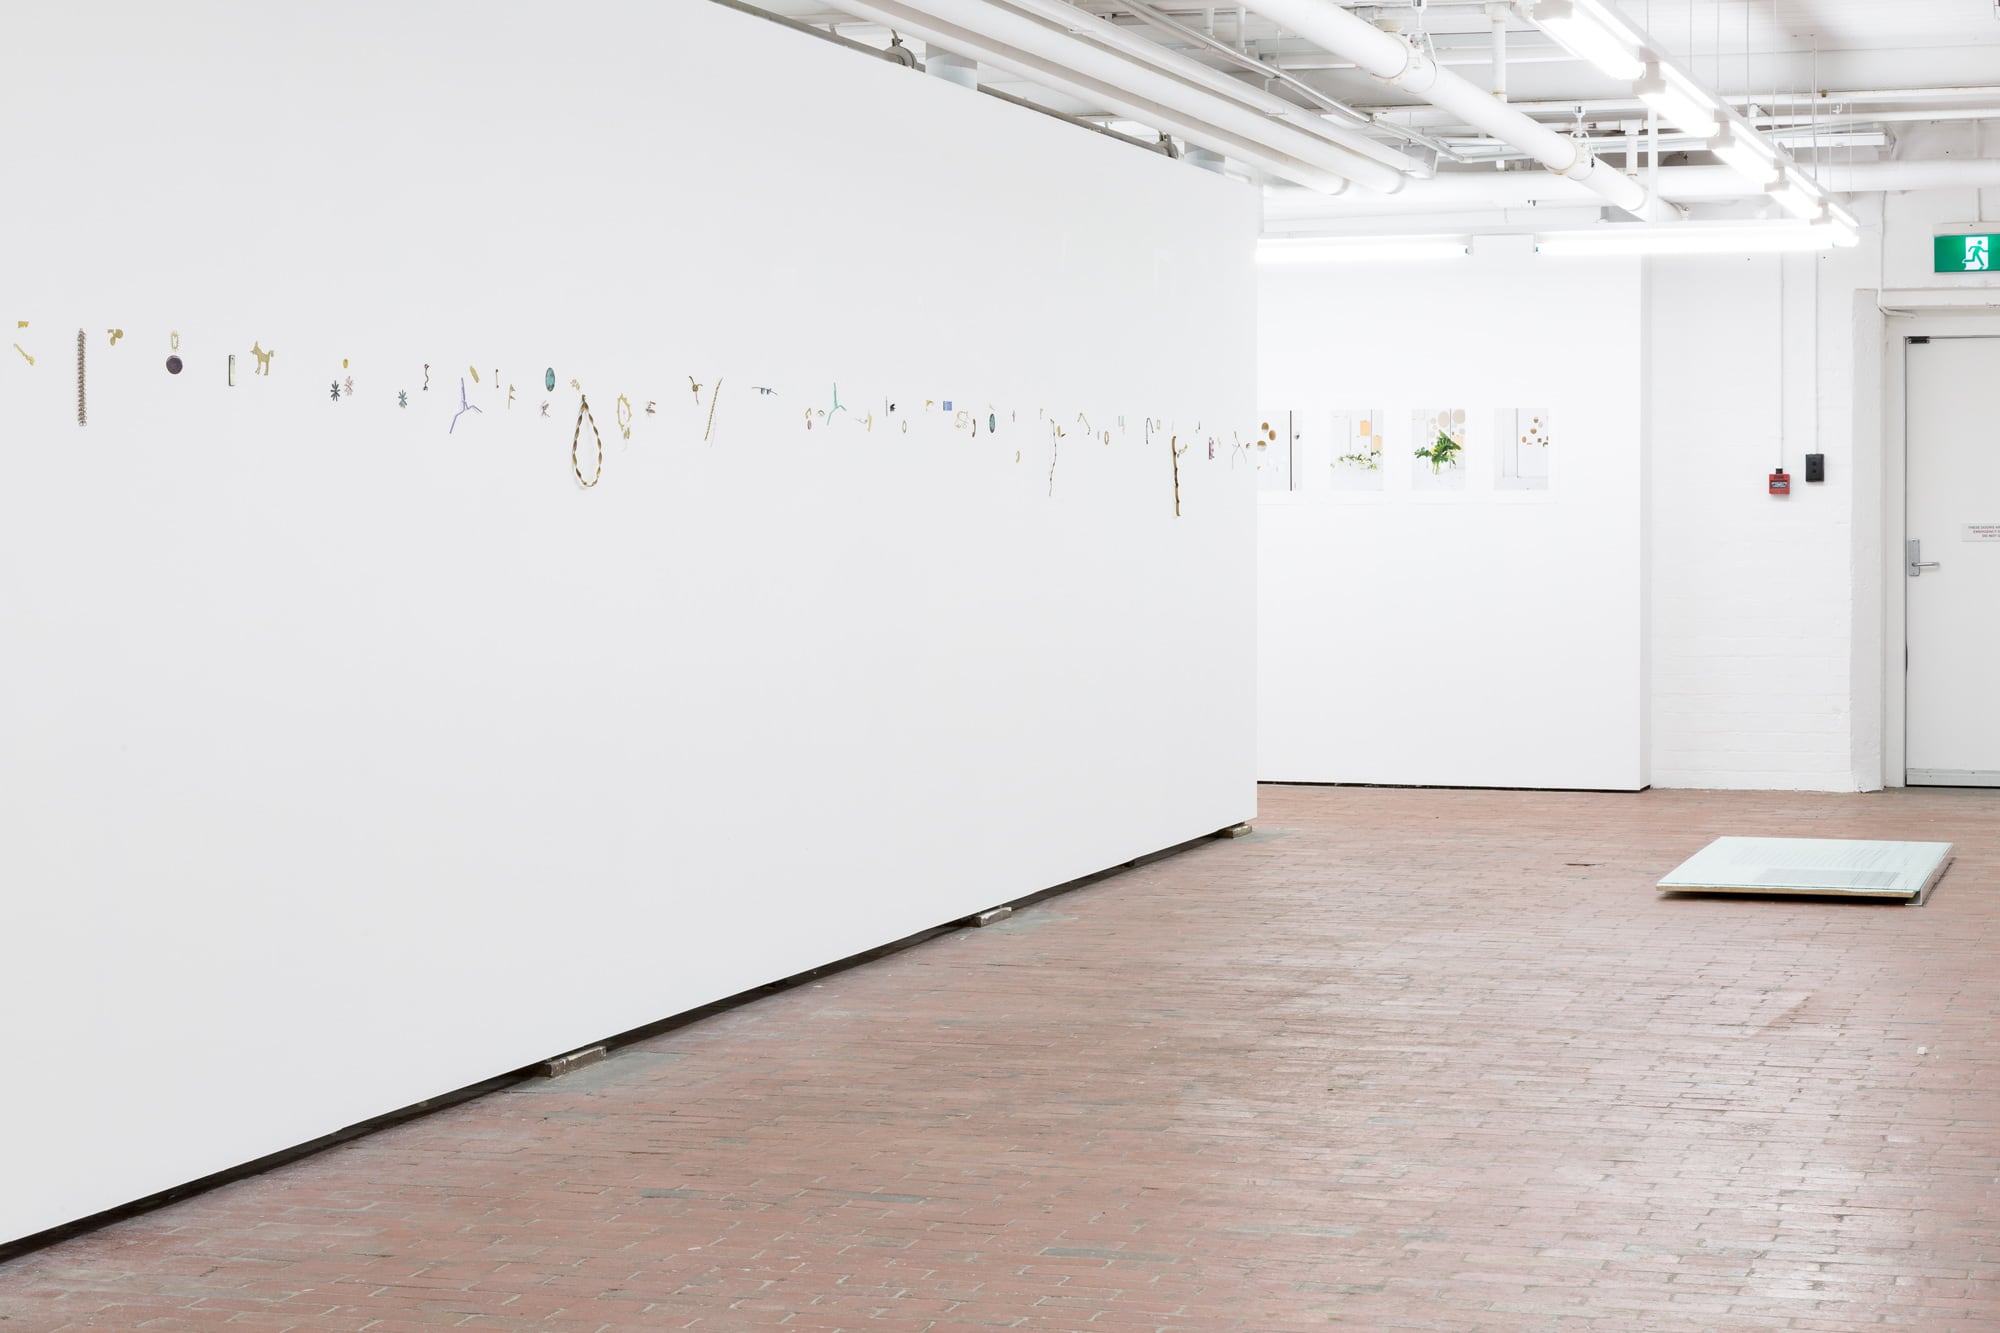 Image 01: SHE TURNS installation view. Left: Rebecca Thomas *On Divers Arts* 2017, assorted materials. Rear: Meredith Turnbull *Flowers and Mirrors* 2017, archival pigment prints on Hahnemühle photo rag paper. Floor: Meredith Turnbull *Paper Portraits* 2017, glass, paper, particleboard, acrylic paint, aluminium. Images courtesy the artists. Photo: Vivian Cooper Smith.